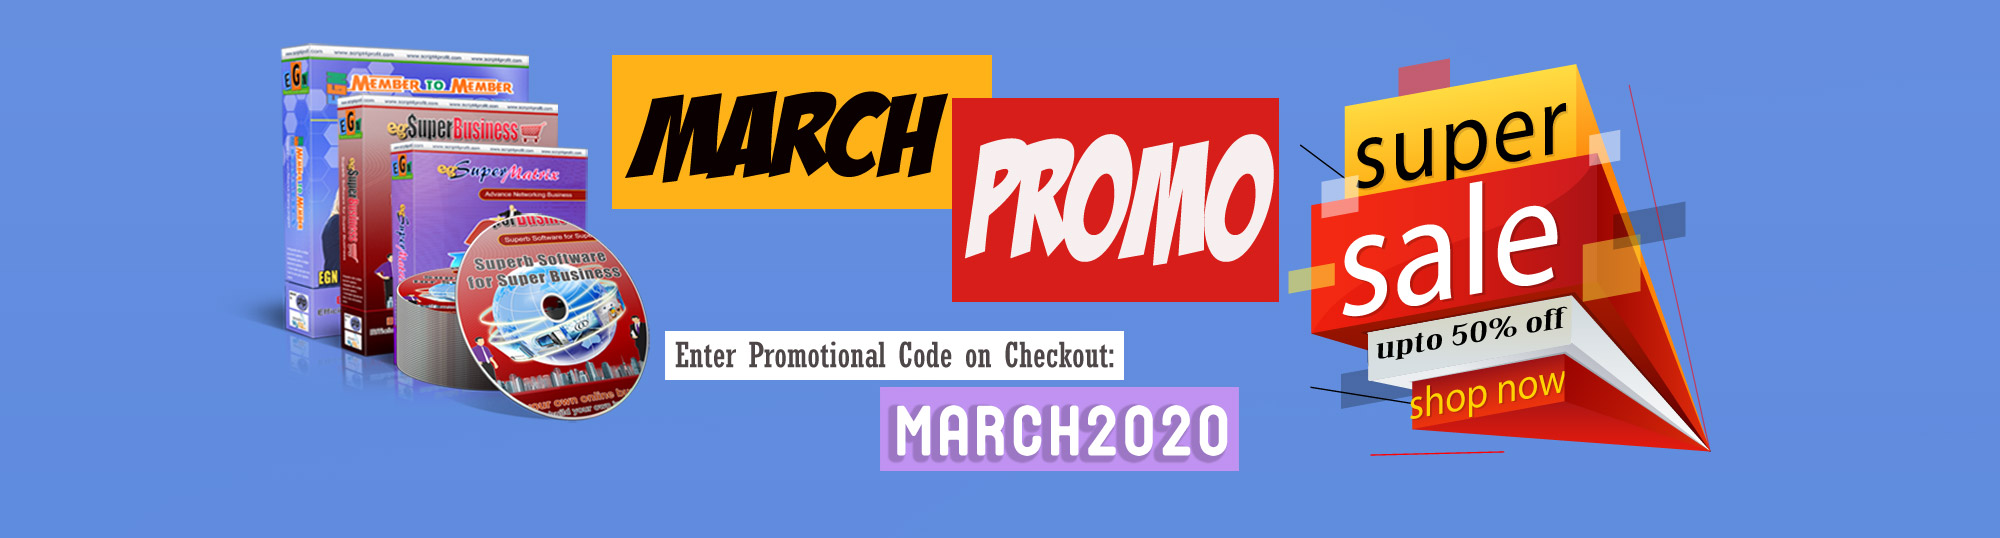 March 2020 PROMO! 50% OFF